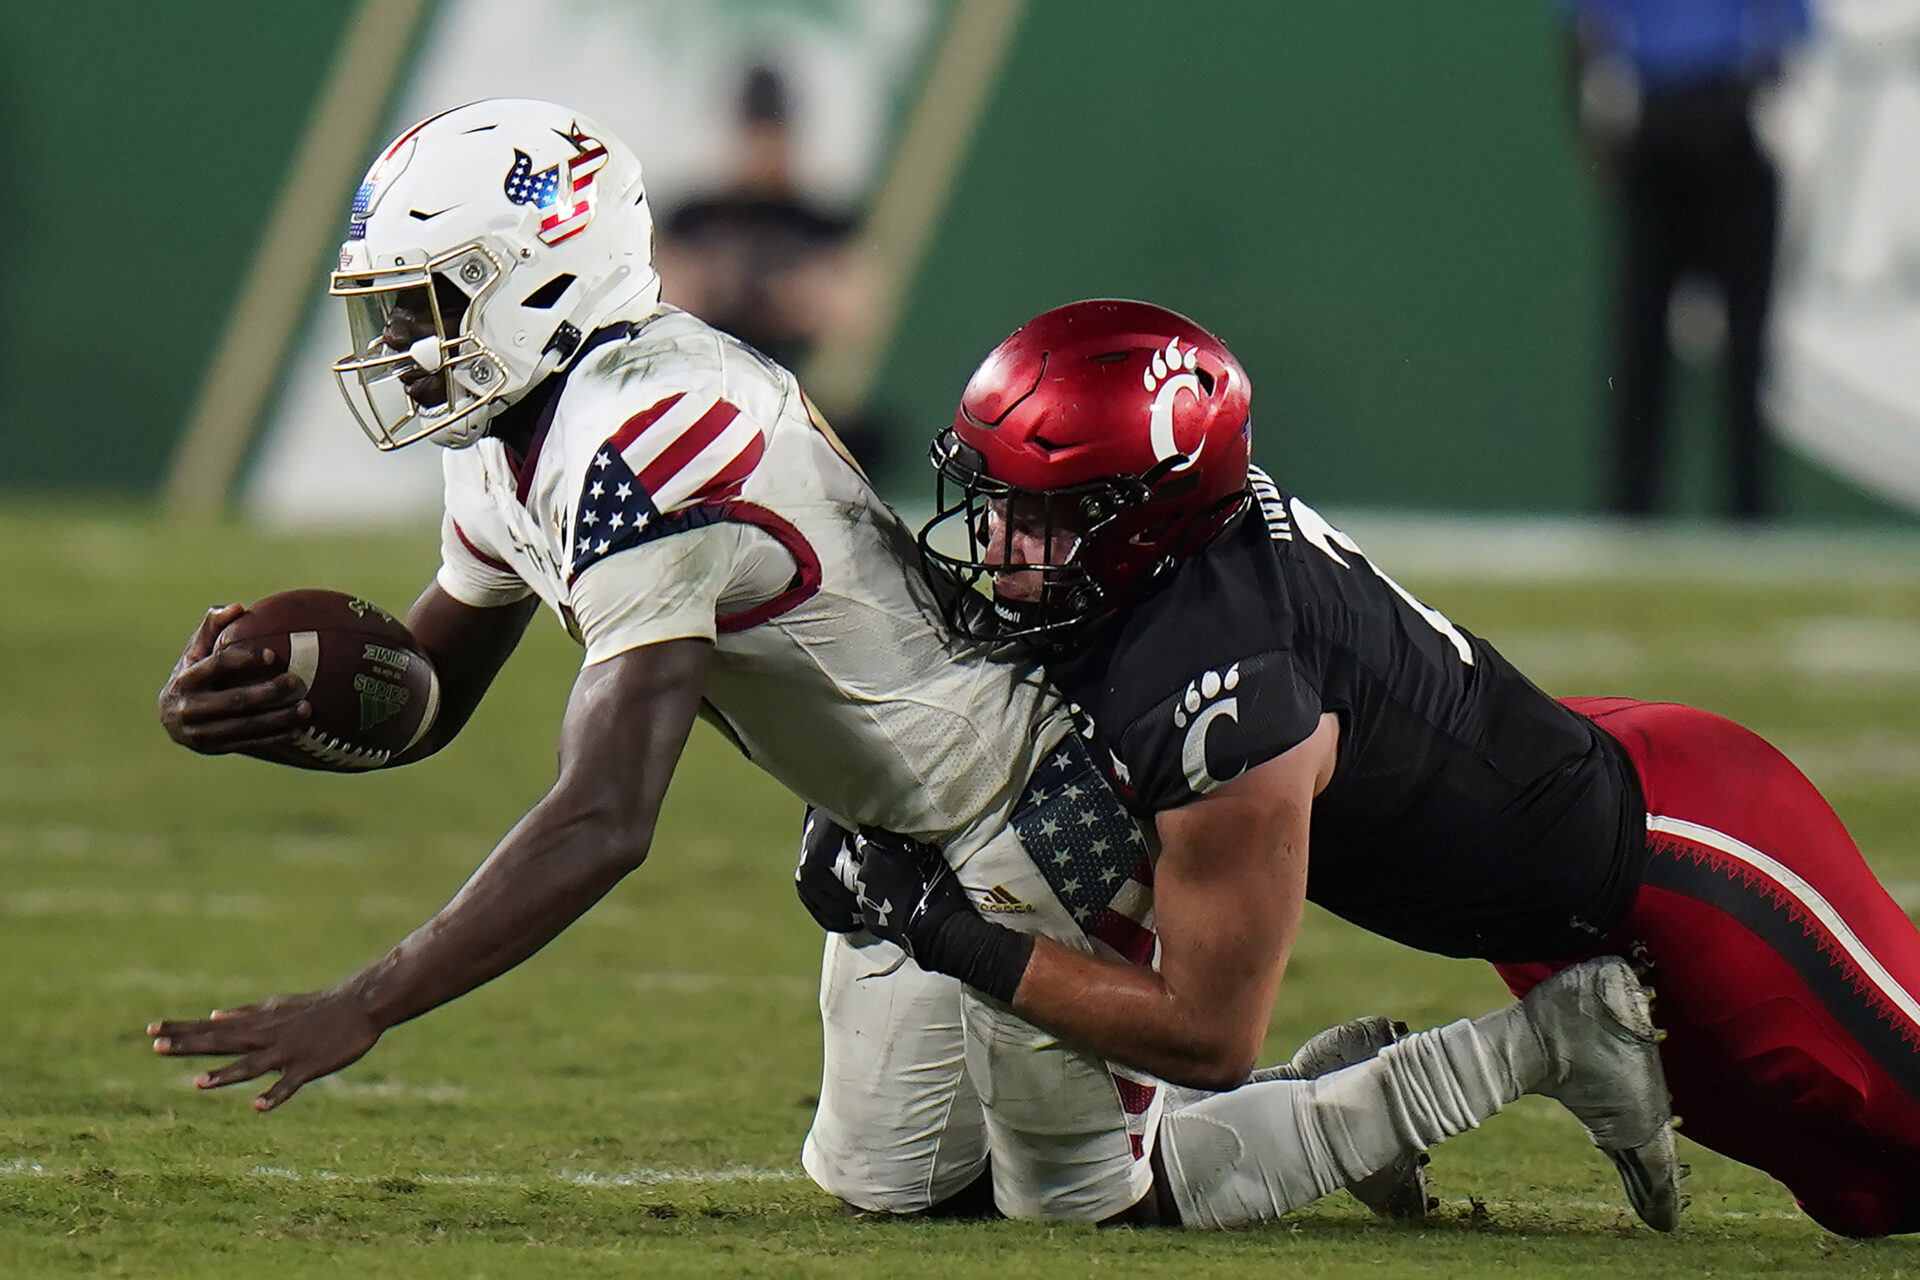 South Florida quarterback Timmy McClain, left, gets sacked by Cincinnati linebacker Wilson Huber during the second half of an NCAA college football game Friday, Nov. 12, 2021, in Tampa, Fla. (AP Photo/Chris O'Meara)